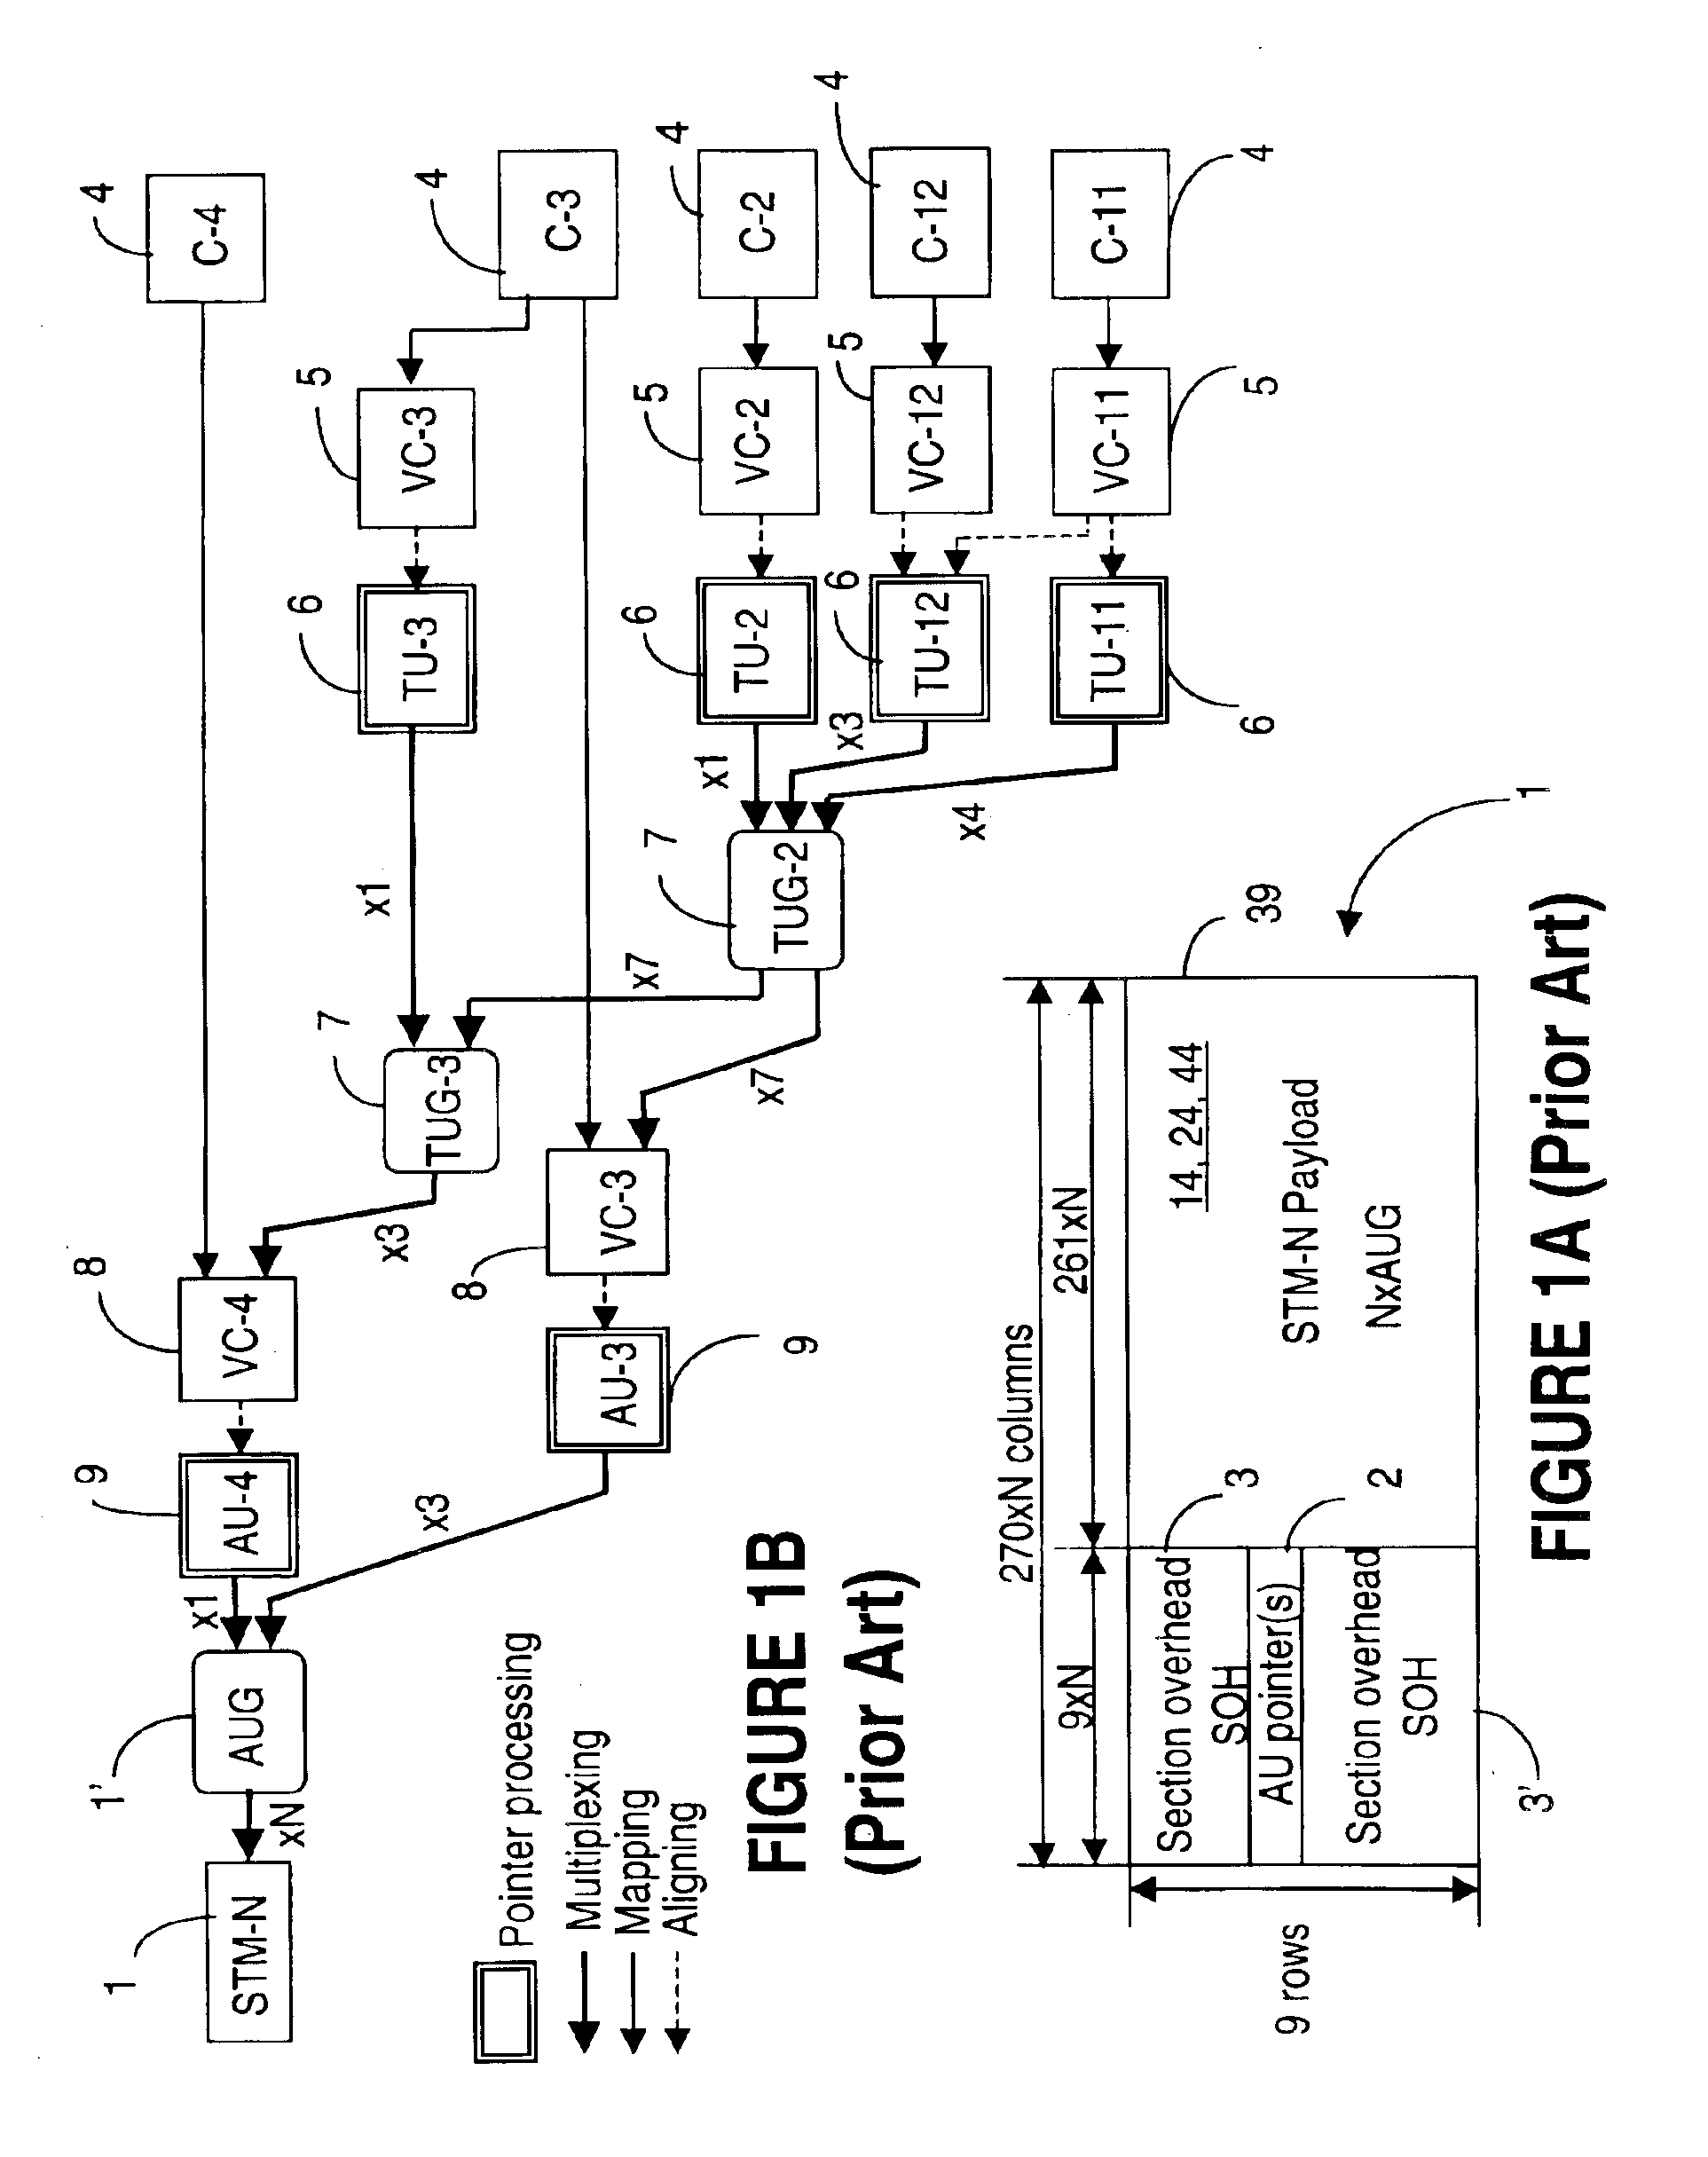 Multiplex hierarchy for high capacity transport systems